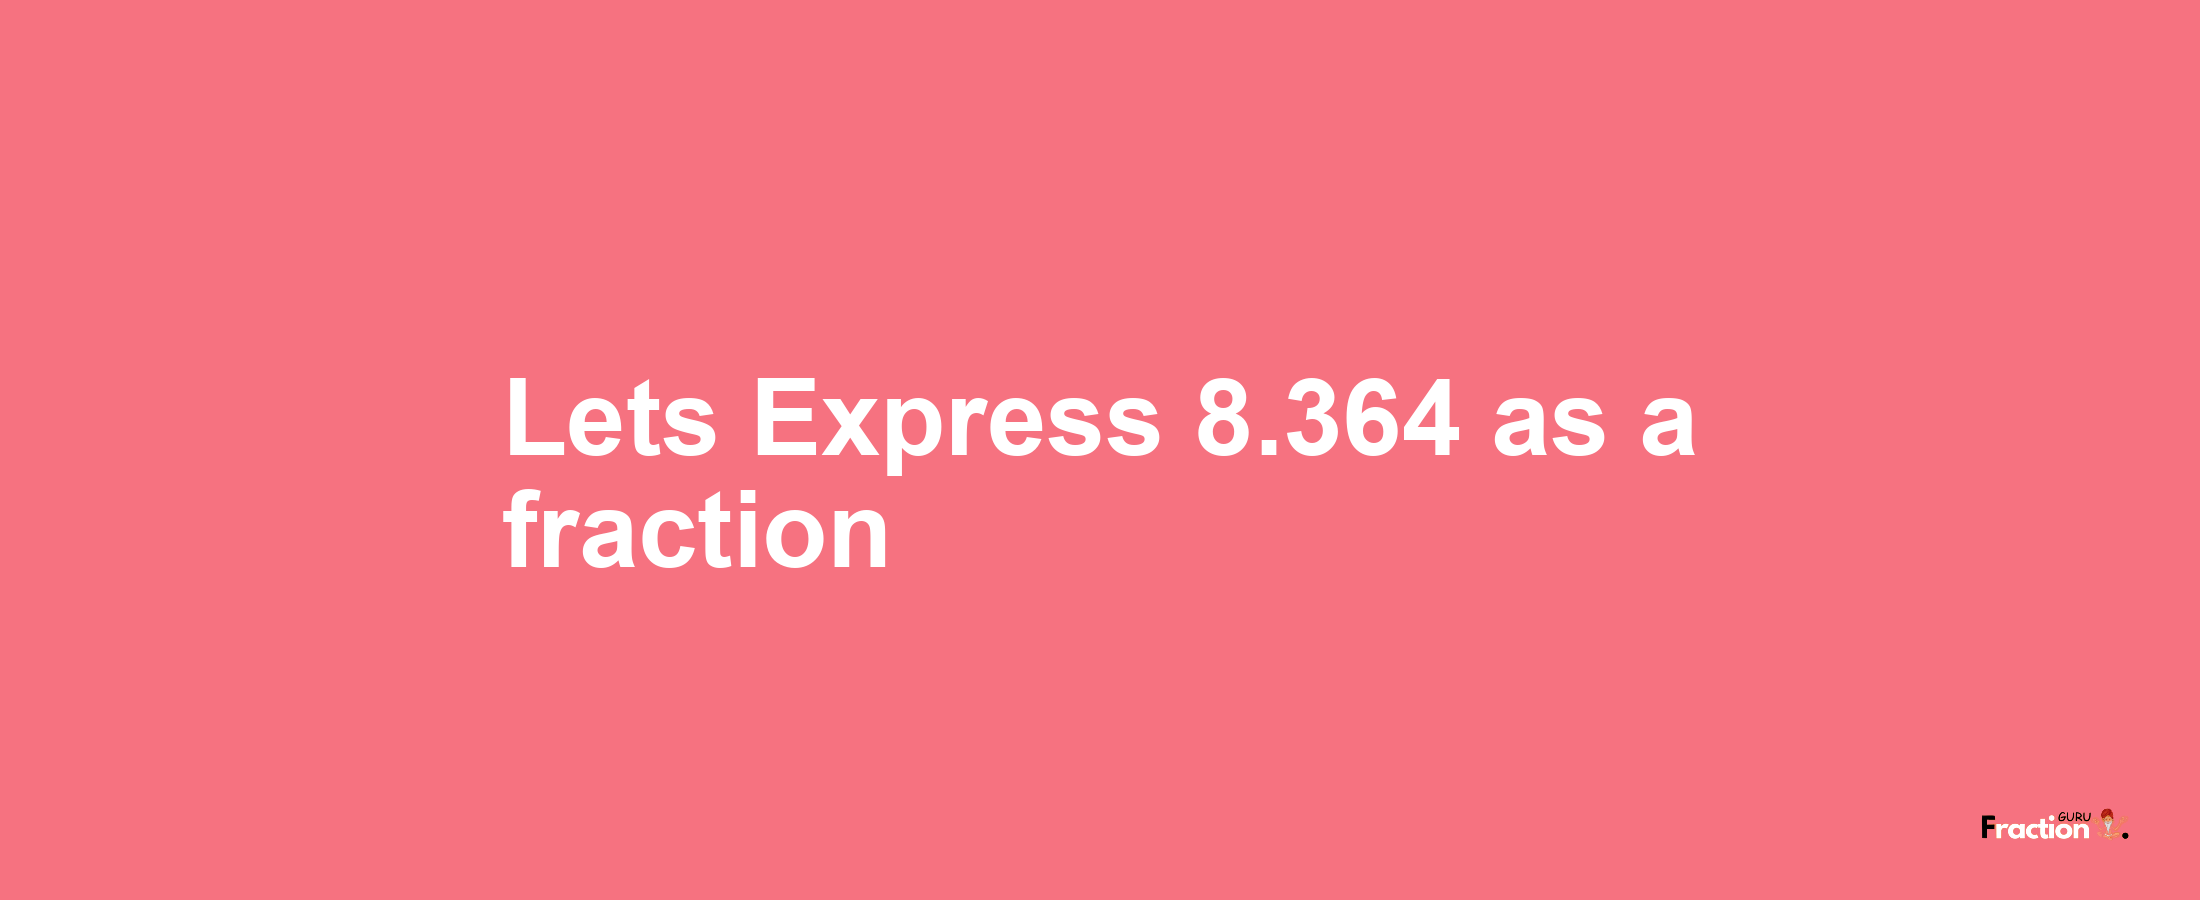 Lets Express 8.364 as afraction